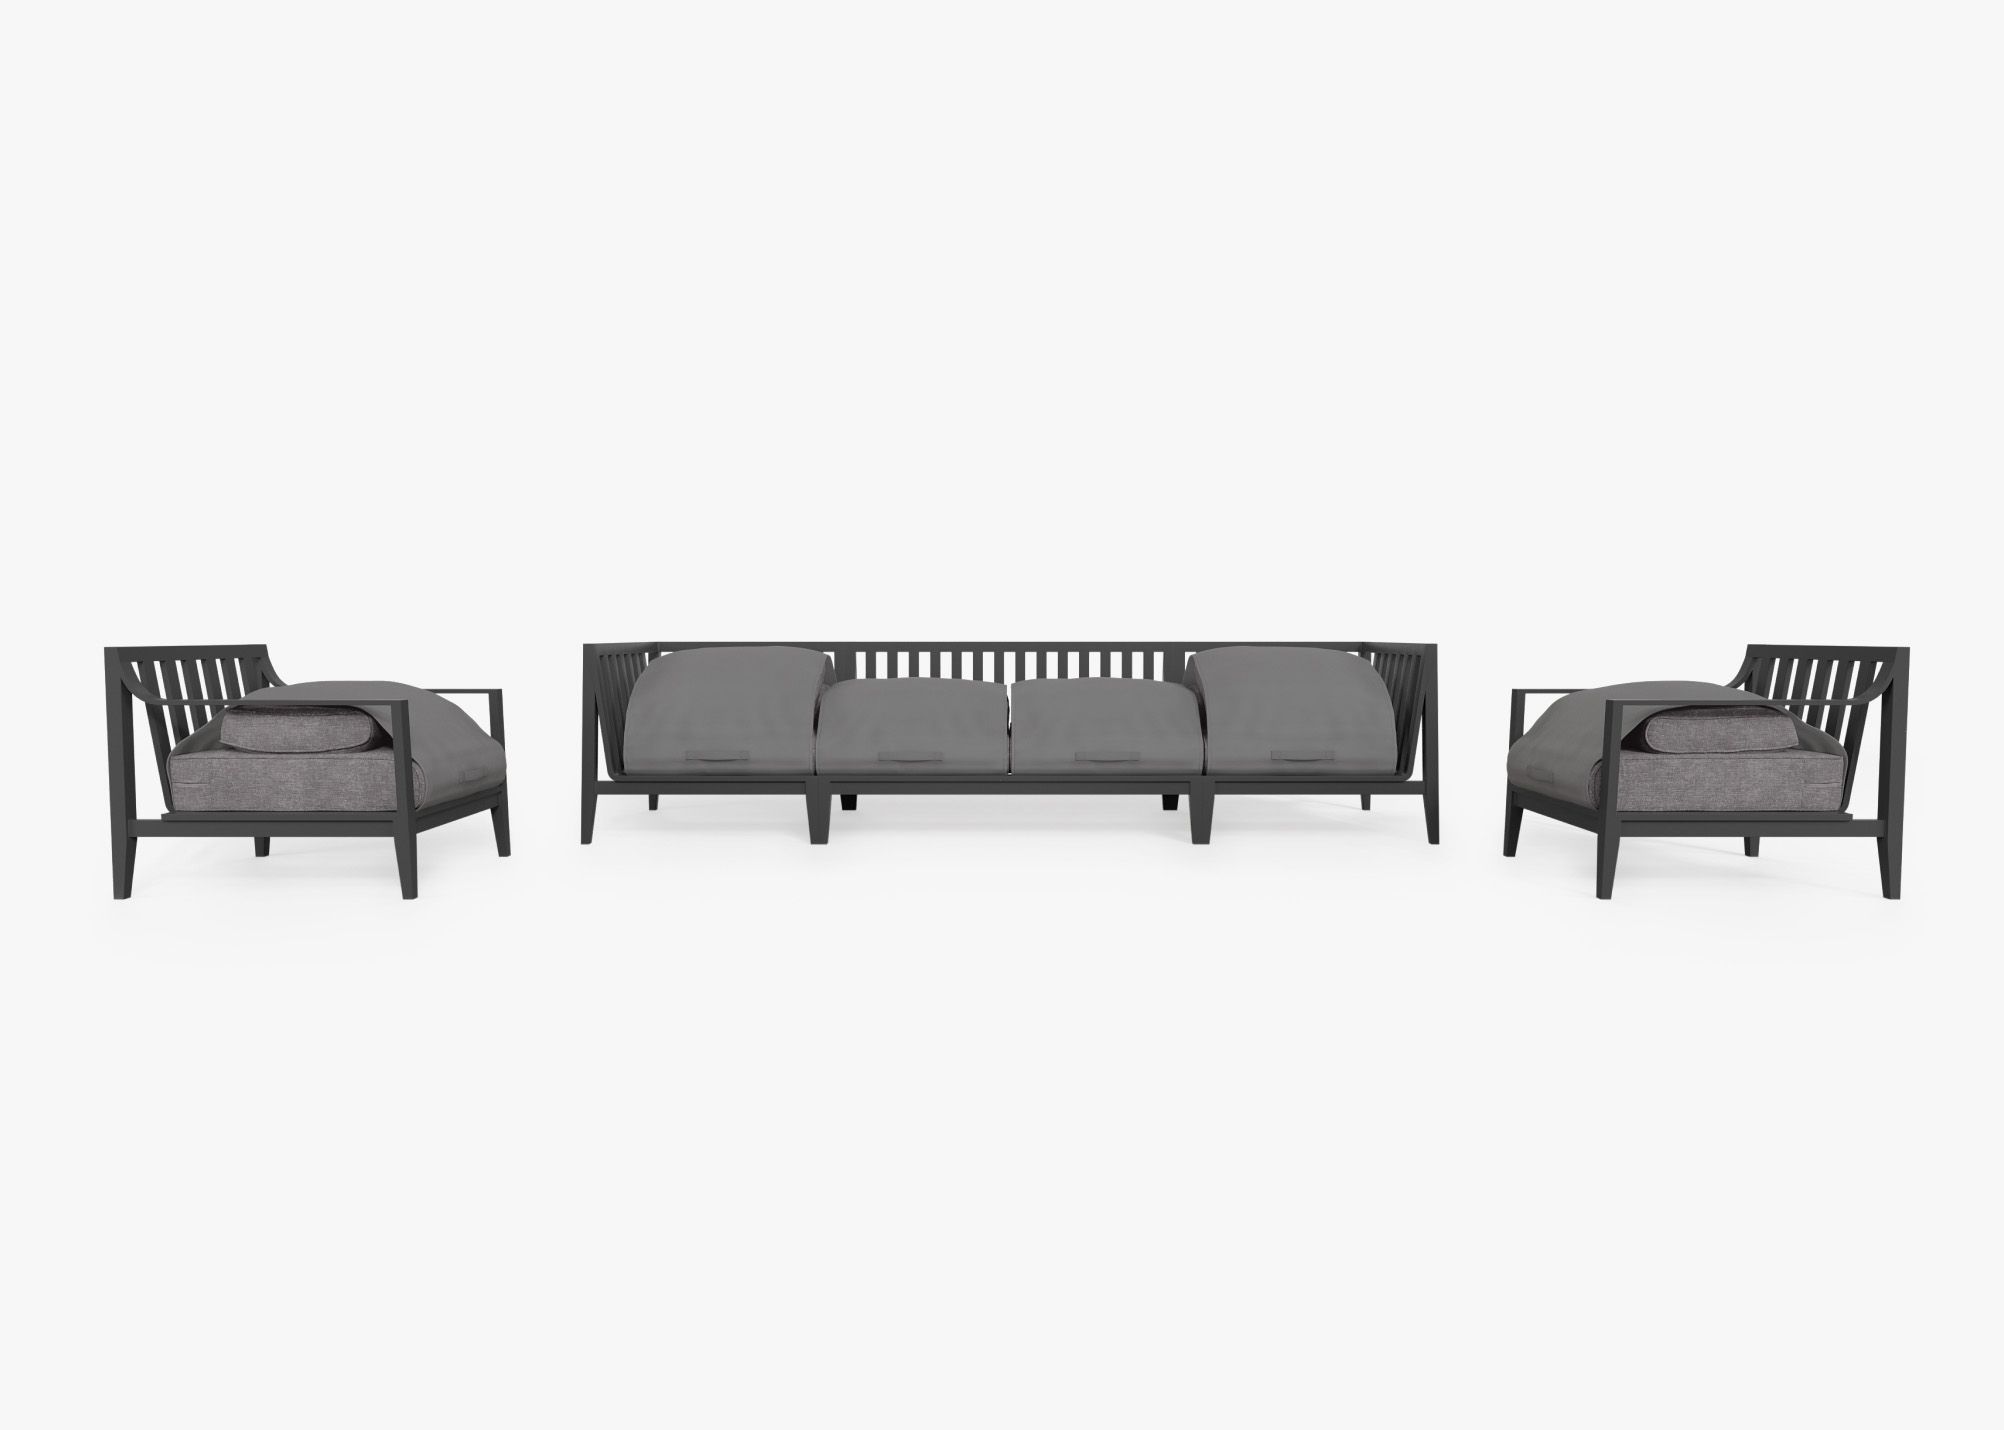 Charcoal Aluminum Outdoor Sofa with Armchairs - 6 Seat shown with the OuterShell outdoor cushion cover, offering exclusive integrated protection.